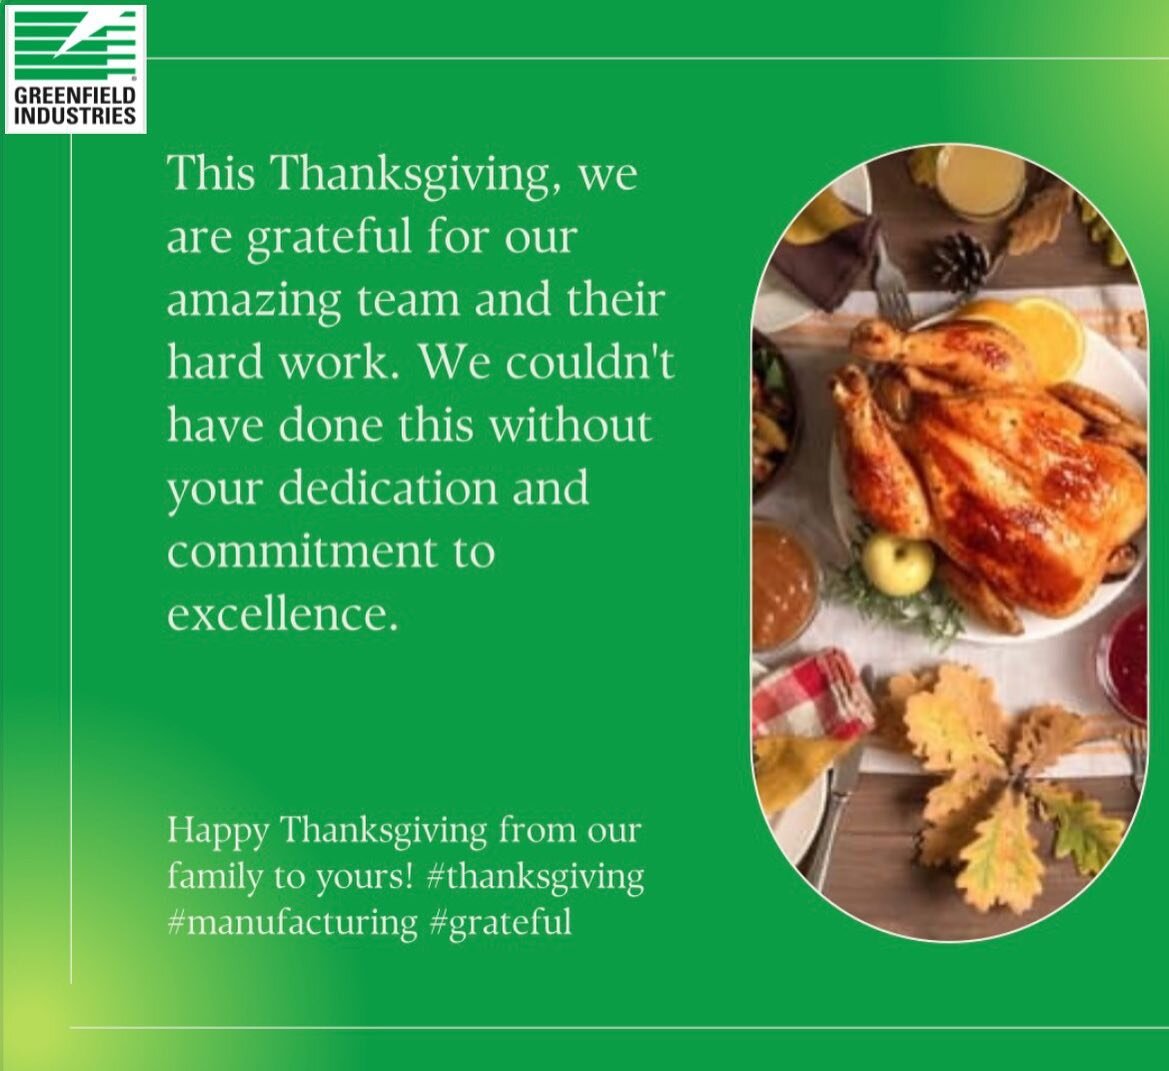 As Thanksgiving Day approaches, we at Greenfield Industries want to take time to say &ldquo;Thank You&rdquo; to all of our loyal employees, associates, vendors, and customers. As we take time to reflect, we know that we would not be where we are toda